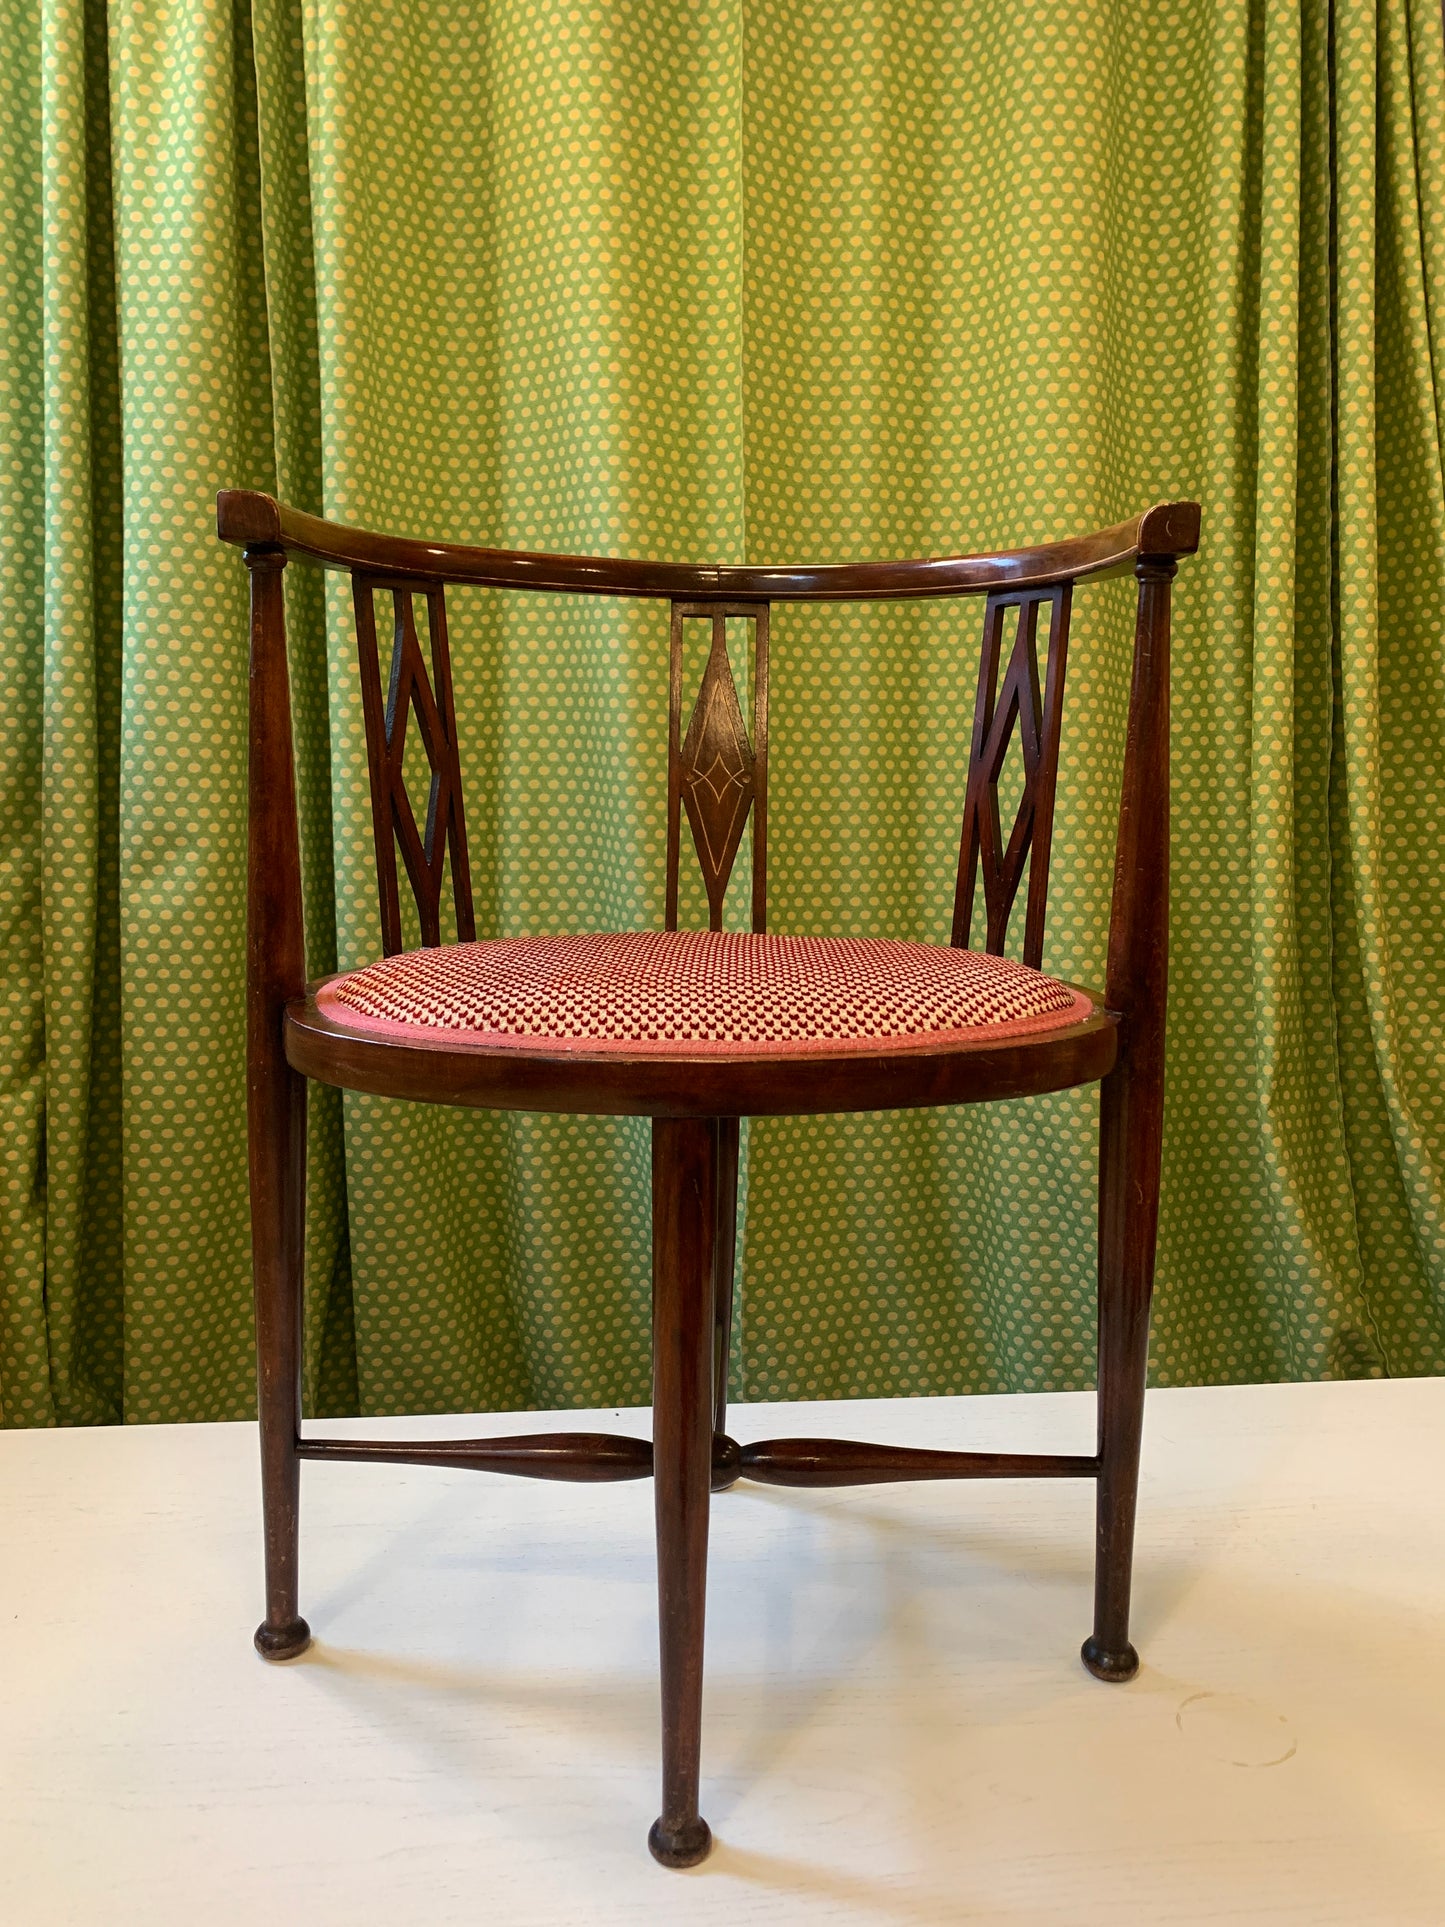 Jugend chair